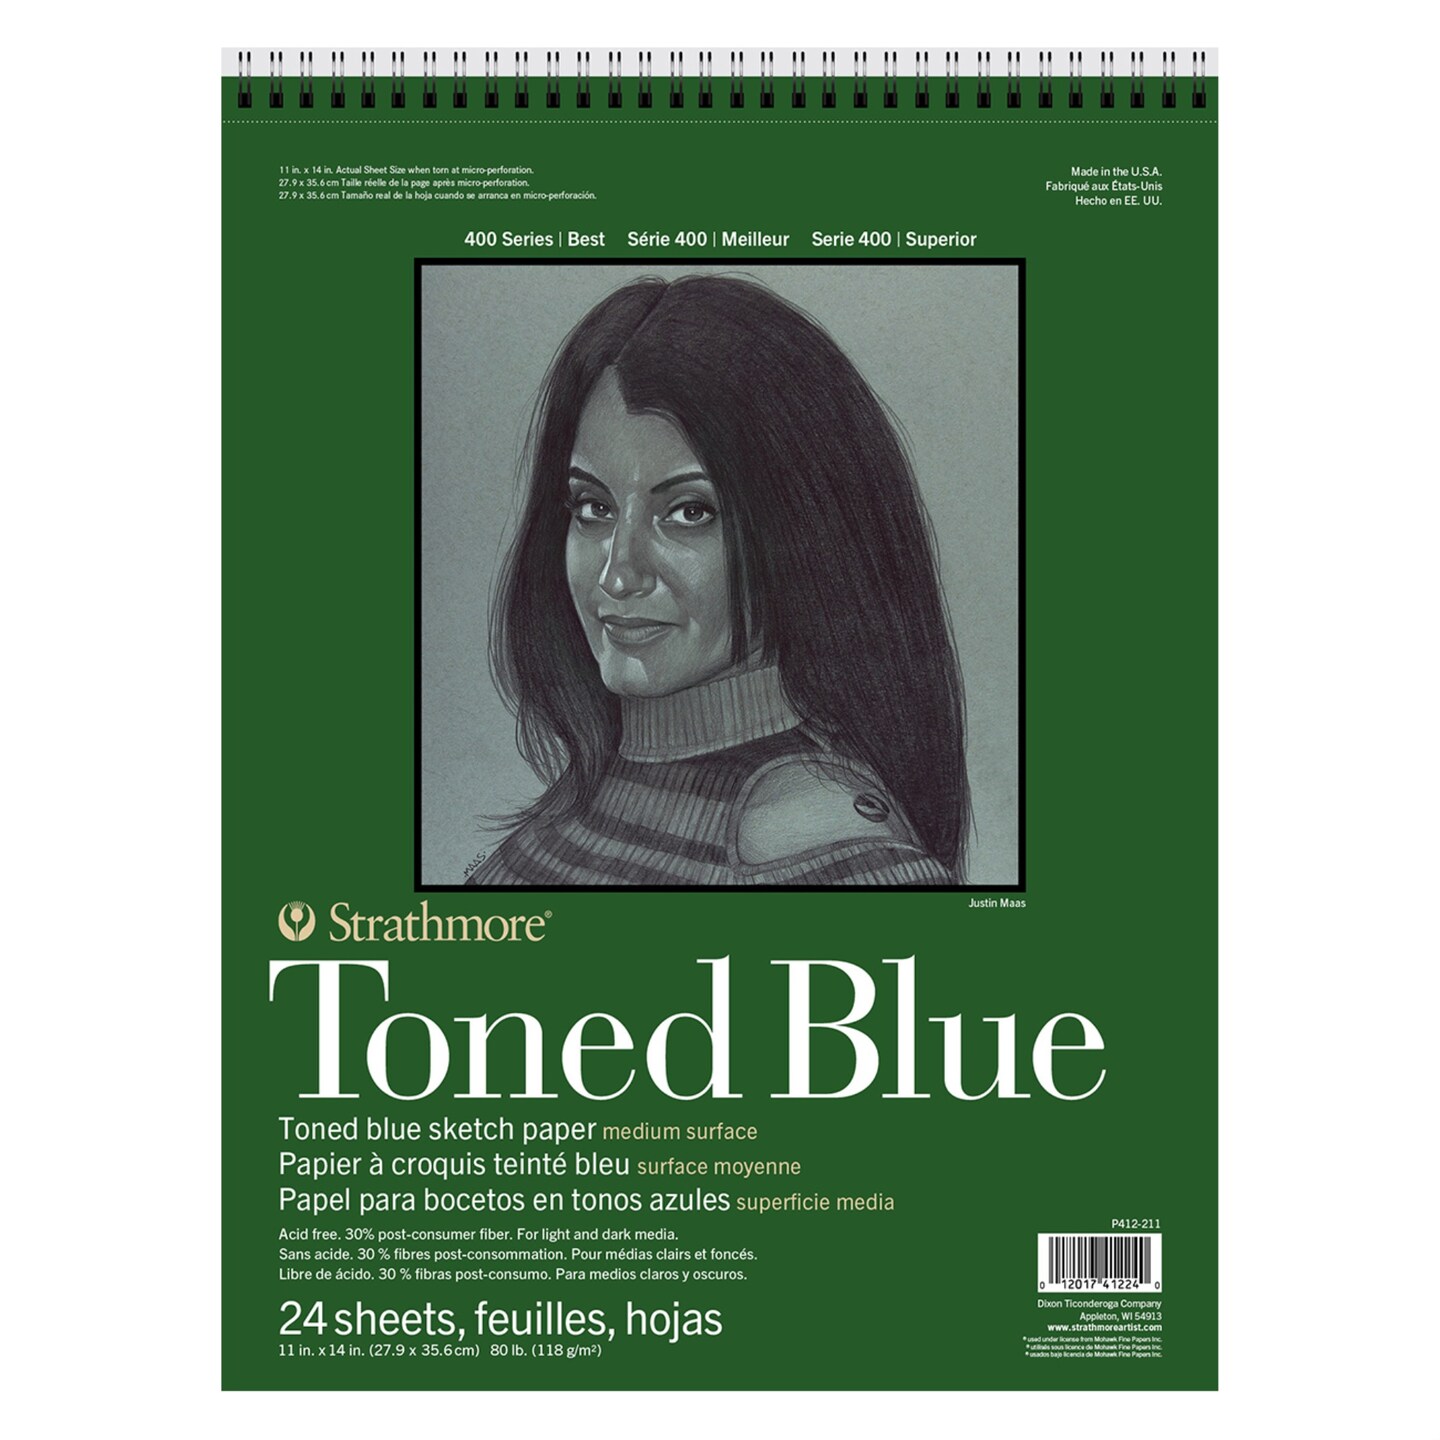 Strathmore 400 Series Sketch Paper Pad, Toned Blue, Top Wire Bound, 11x14 inch, 24 Sheets (80lb/118g) - Artist Sketchbook for Adults and Students - Graphite, Charcoal, Pencil, Colored Pencil